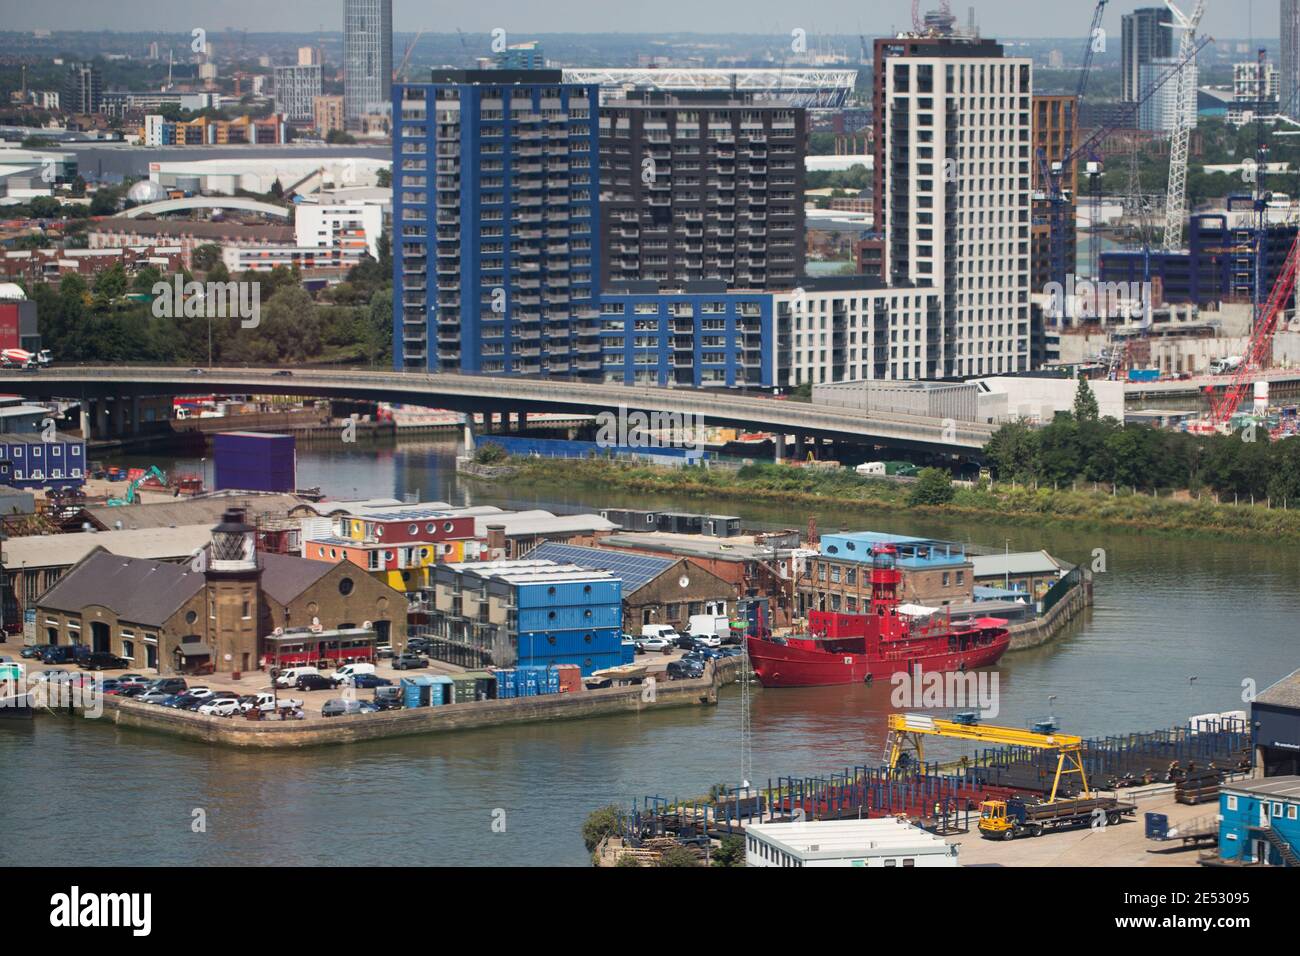 An aerial view of Trinity Buoy Wharf, the Lower Lea Crossing and apartment buildings on Bow Creek of the River Lea and the River Thames in London, UK. Stock Photo